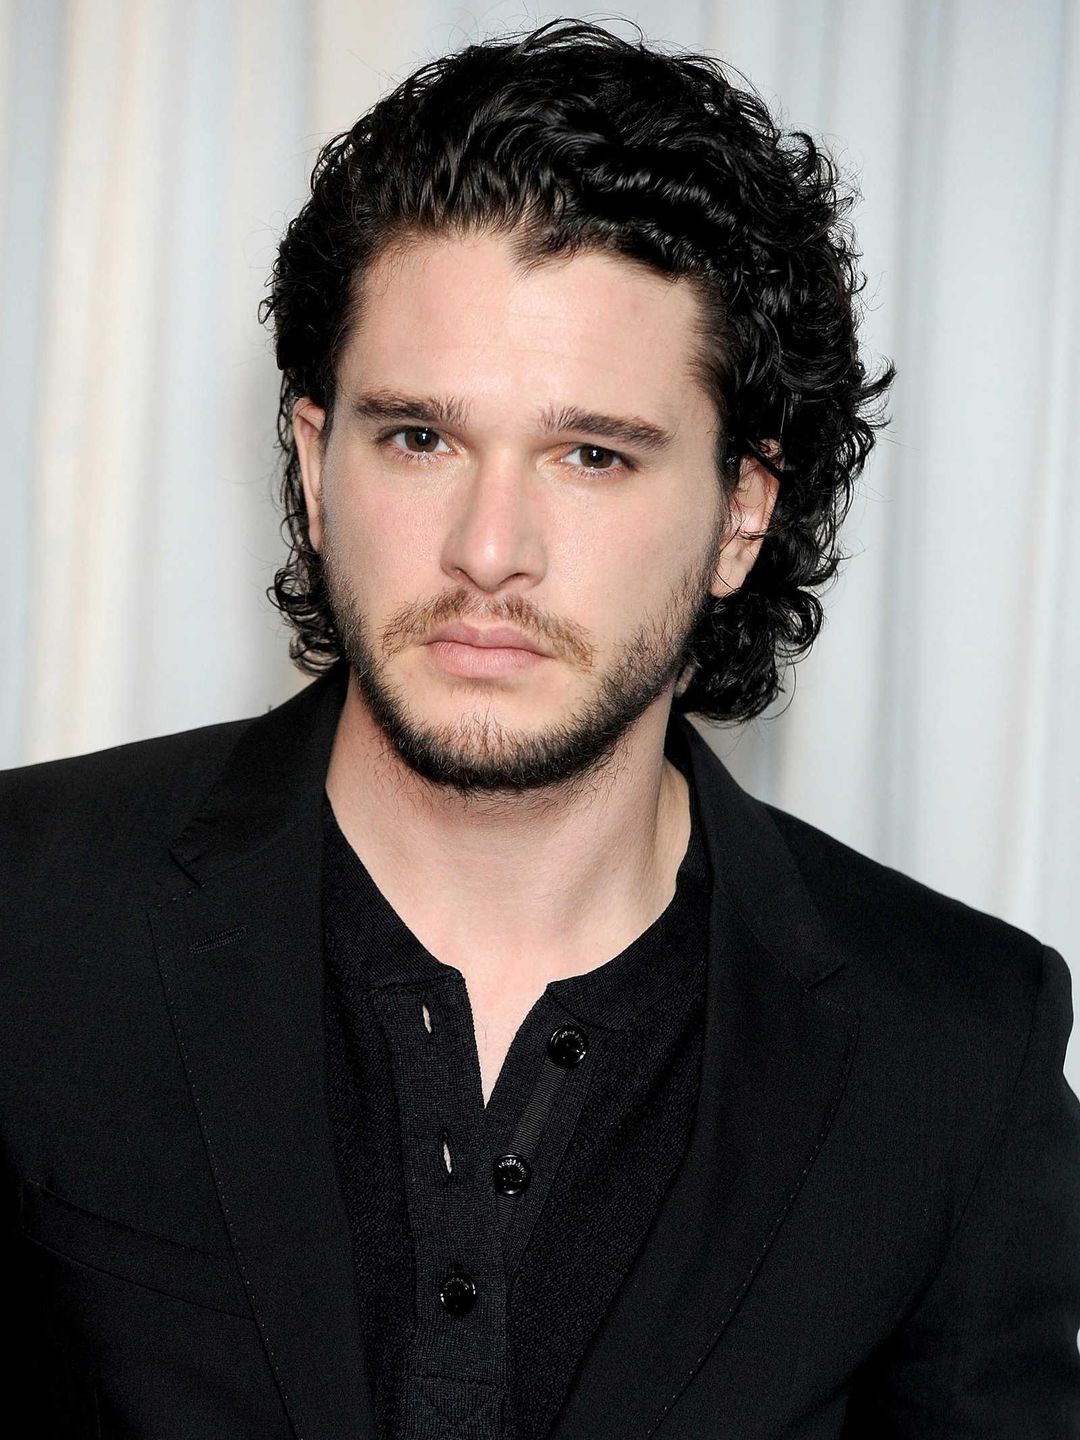 Kit Harington who is his father